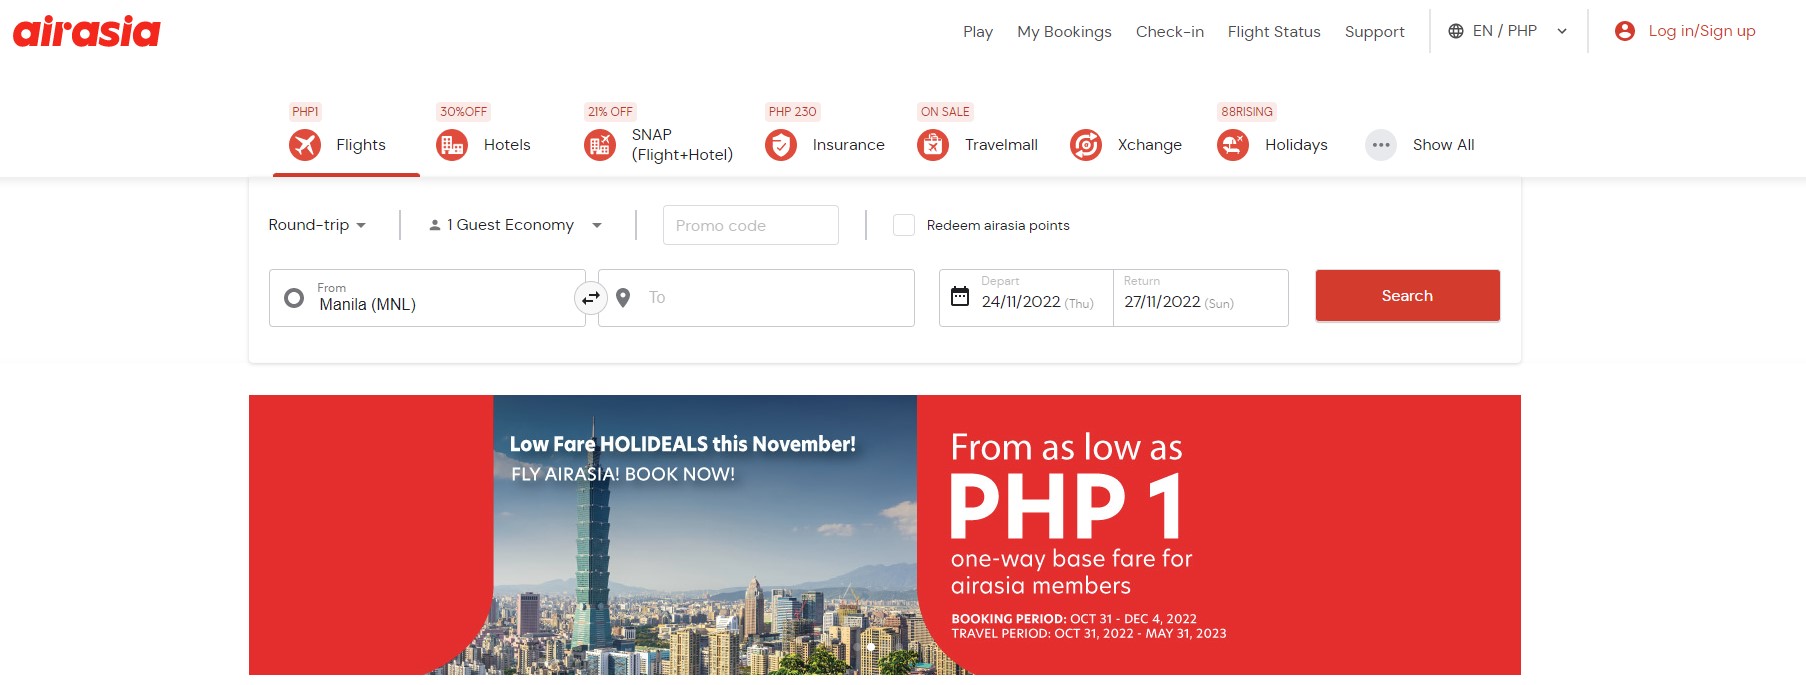 cheapest airlines in the philippines - AirAsia